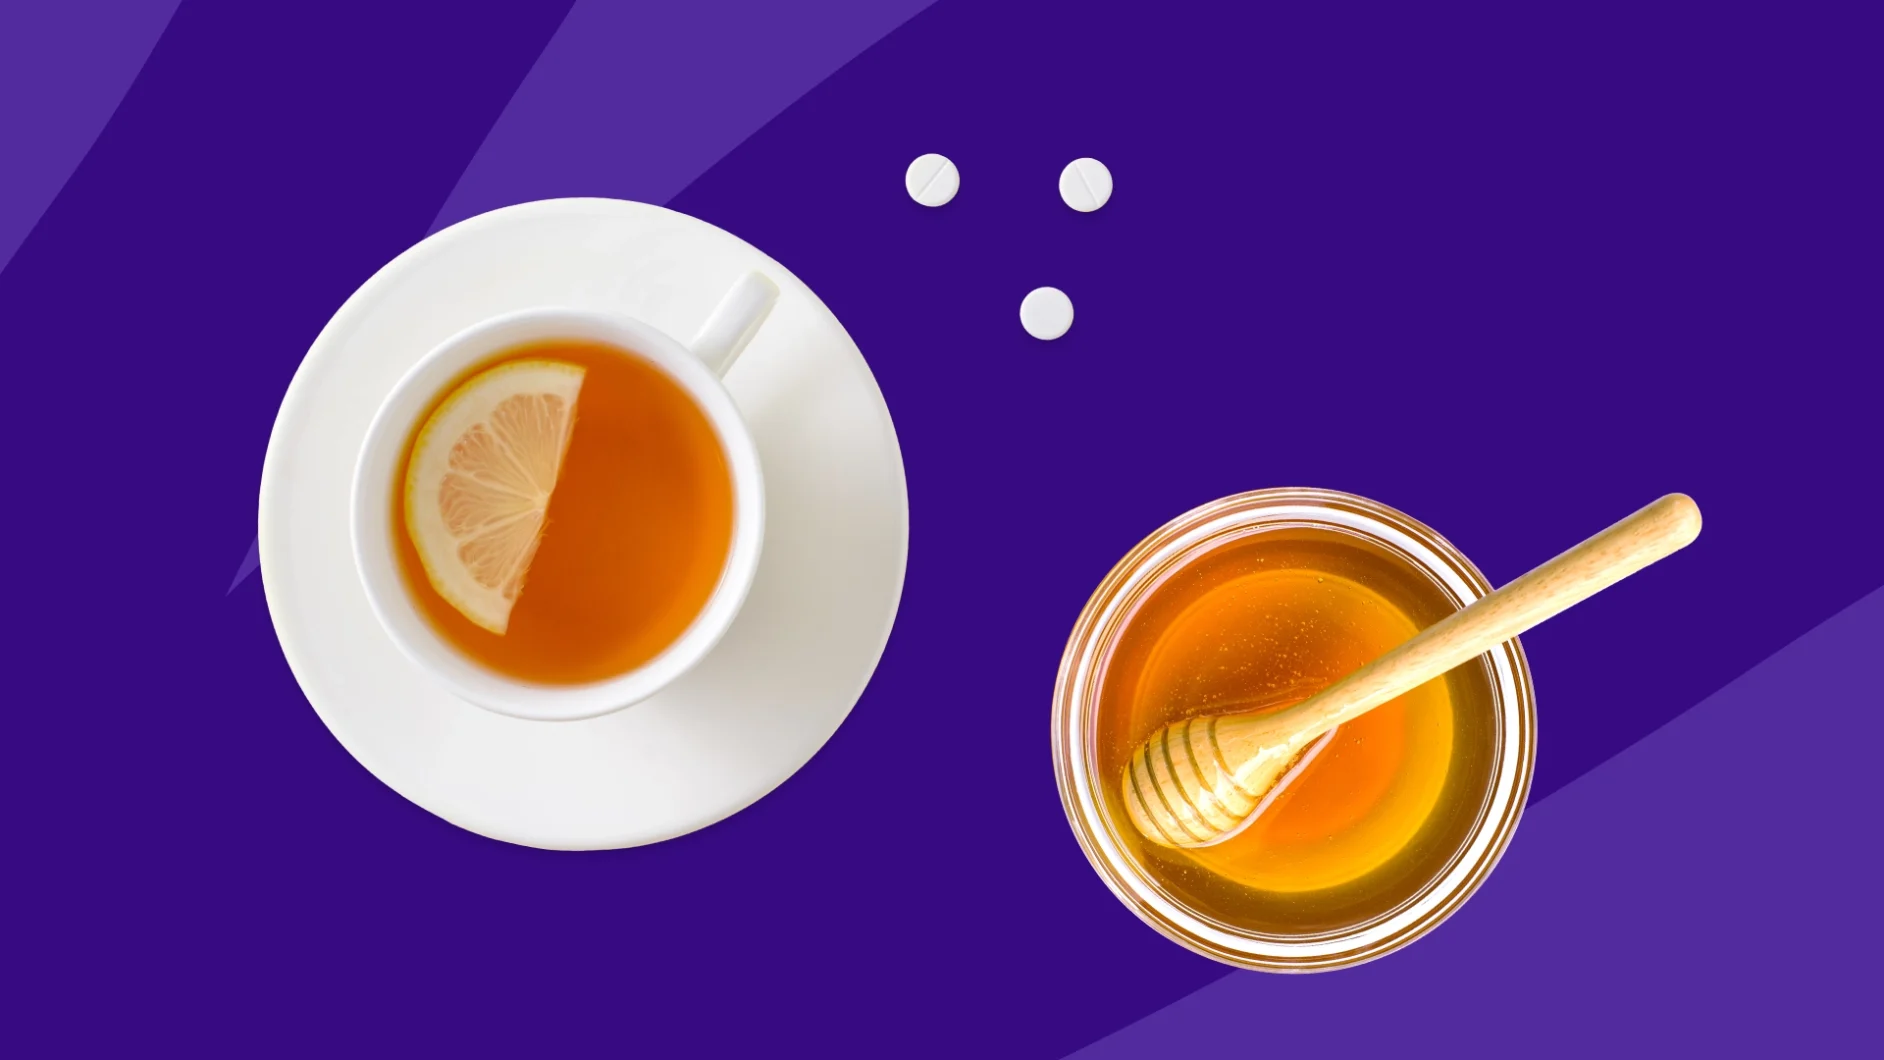 Tea, honey, and pills - 10 dry cough remedies